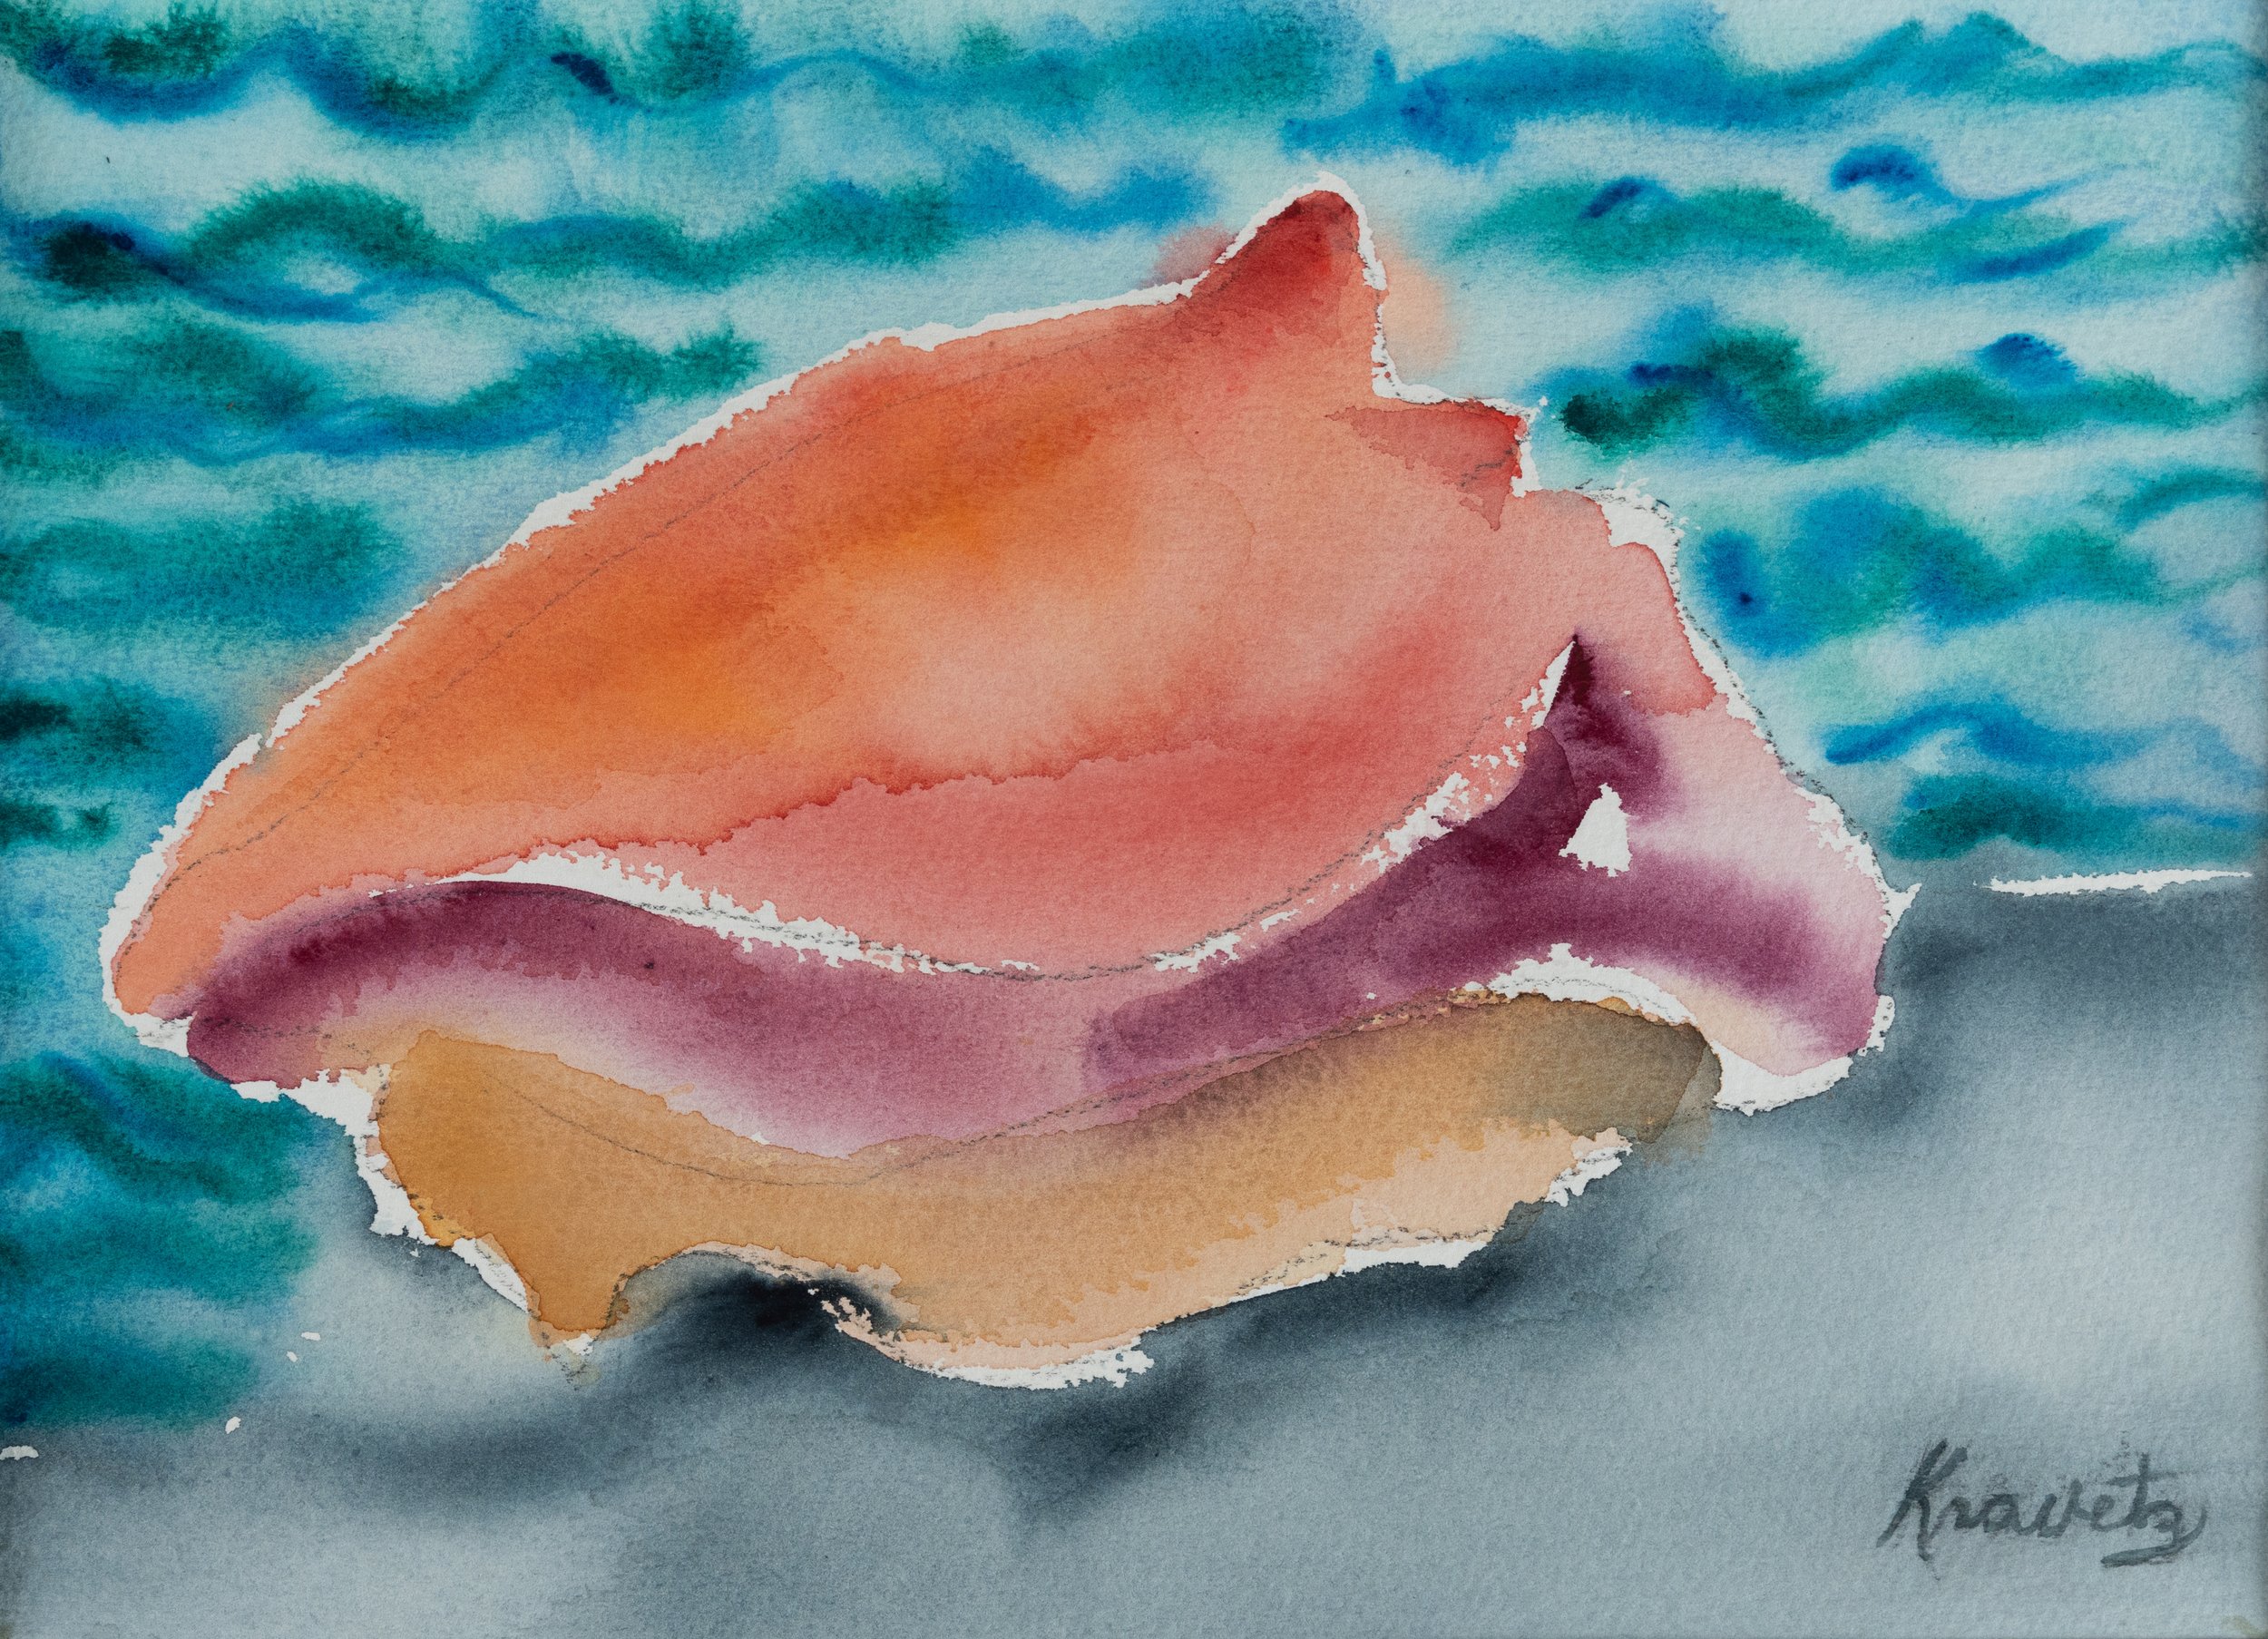 Sea and Conch Shell, 2003, watercolor, 16x20 inches with mat